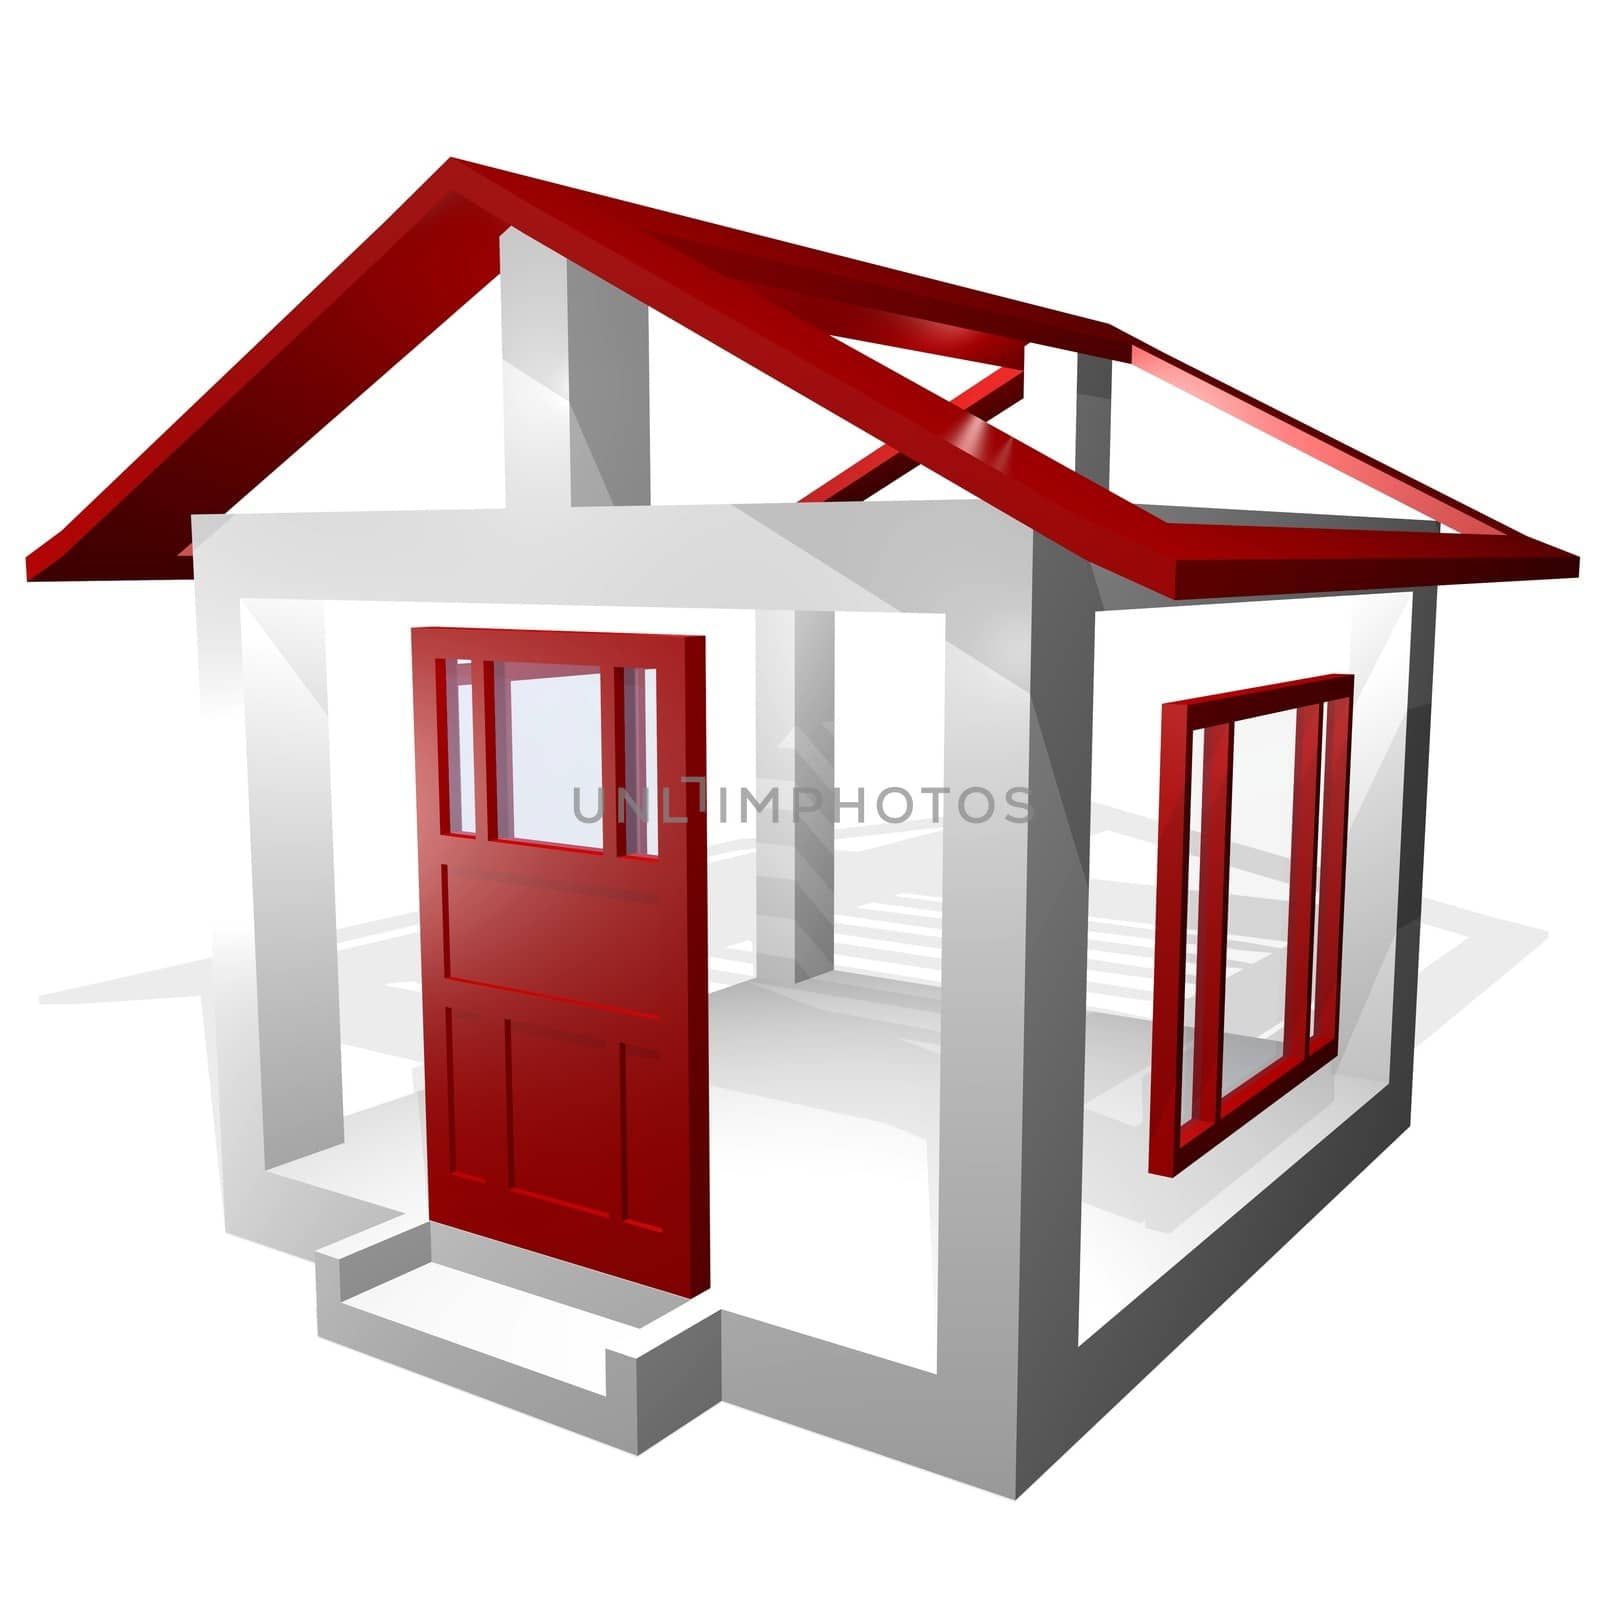 House building or construction concept illustrated with a basic house frame with no walls
